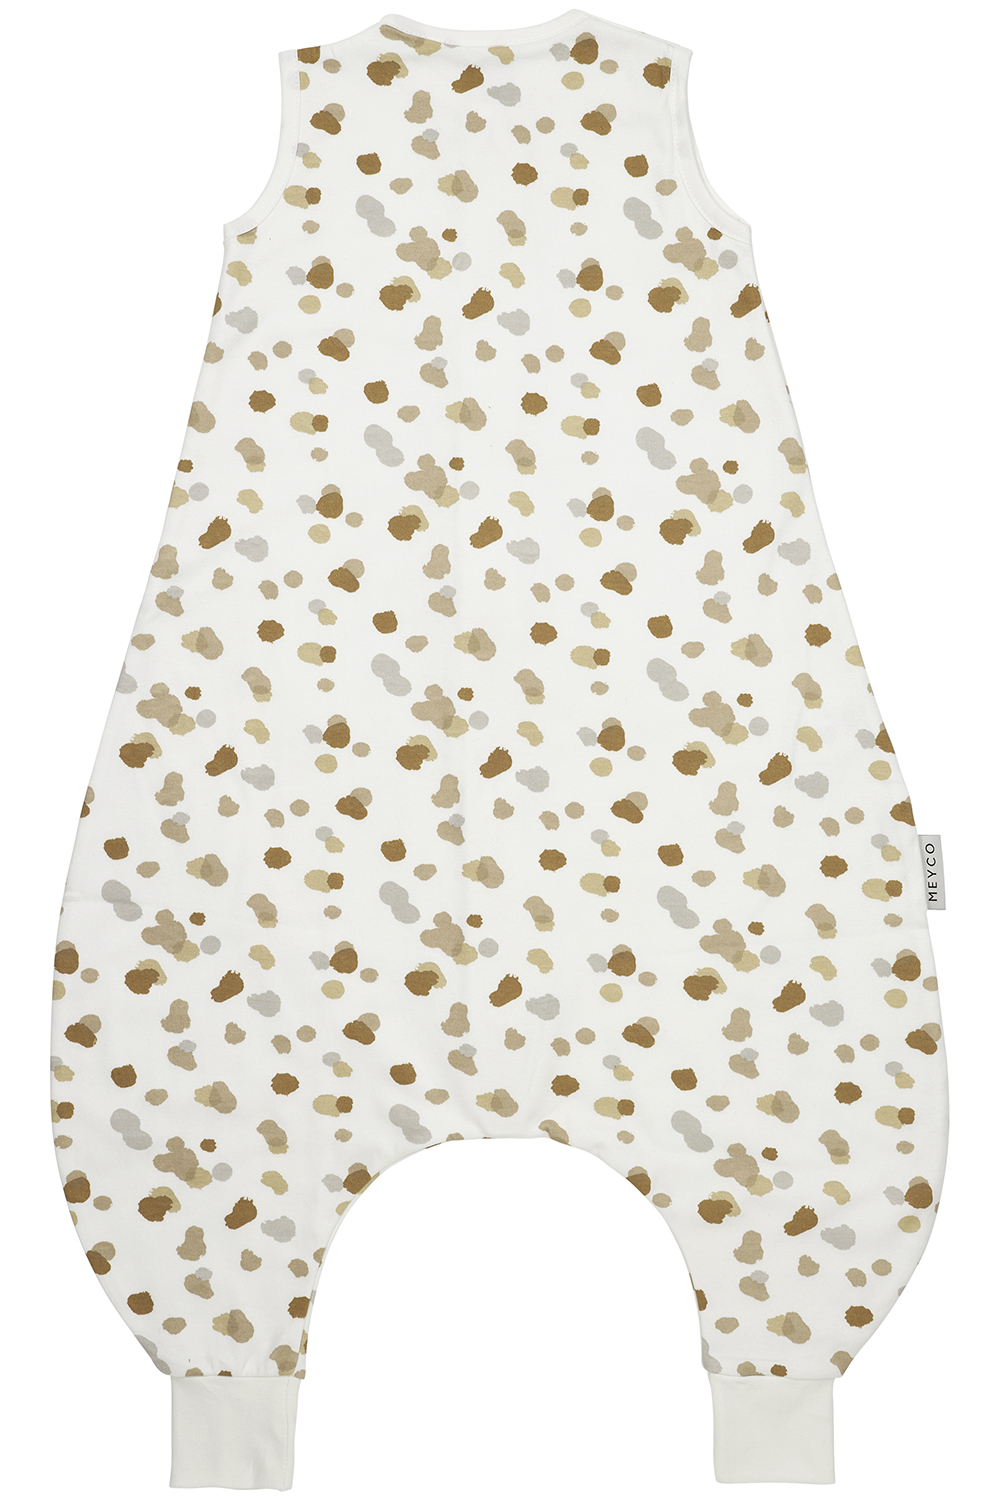 Baby zomer slaapoverall jumper Stains - sand - 104cm